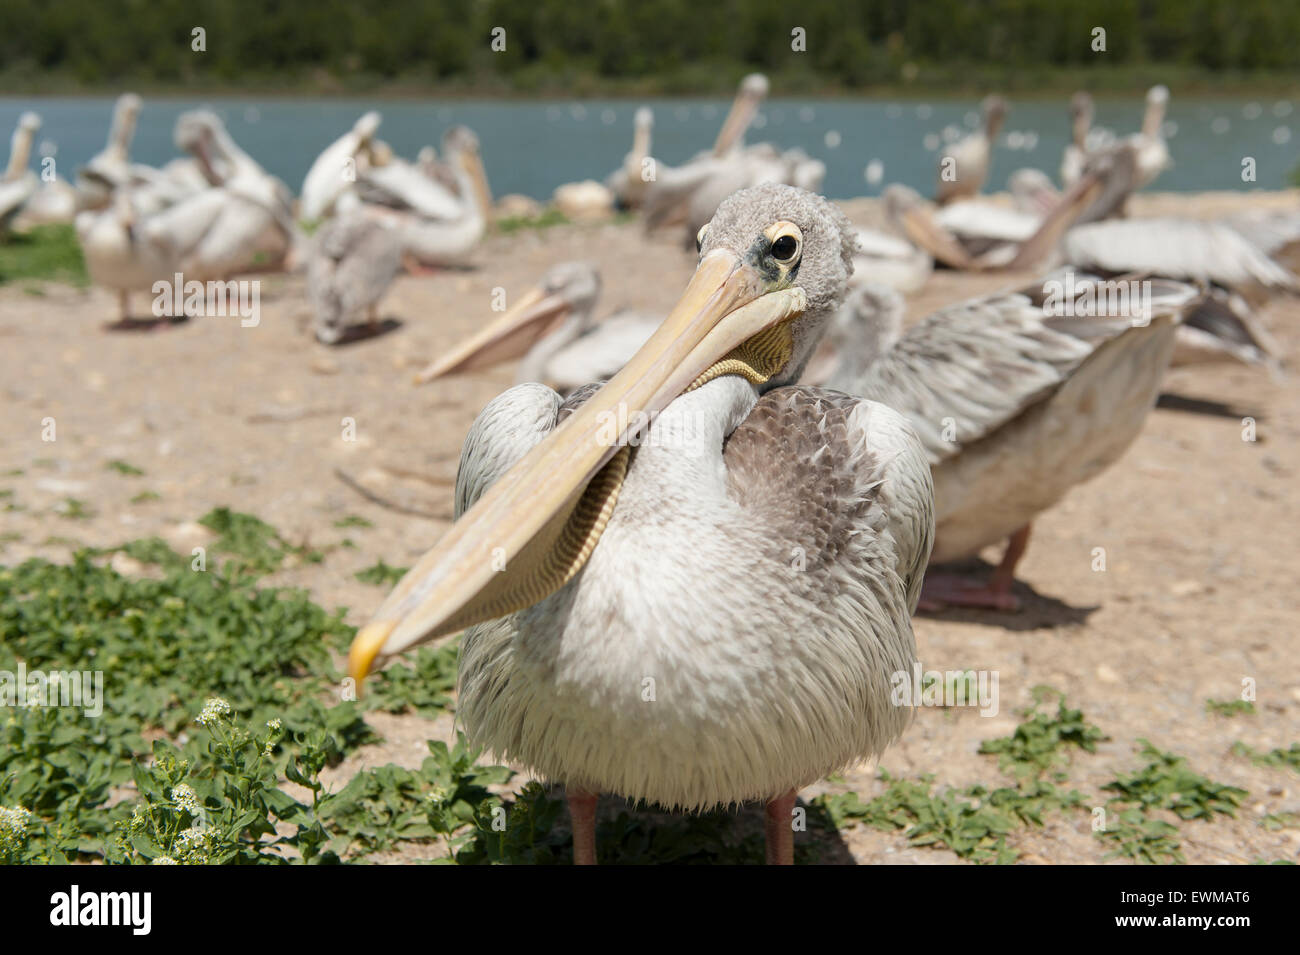 French Pelicans at the Réserve Africaine de Sigean near Sigean, Languedoc, southern France Stock Photo